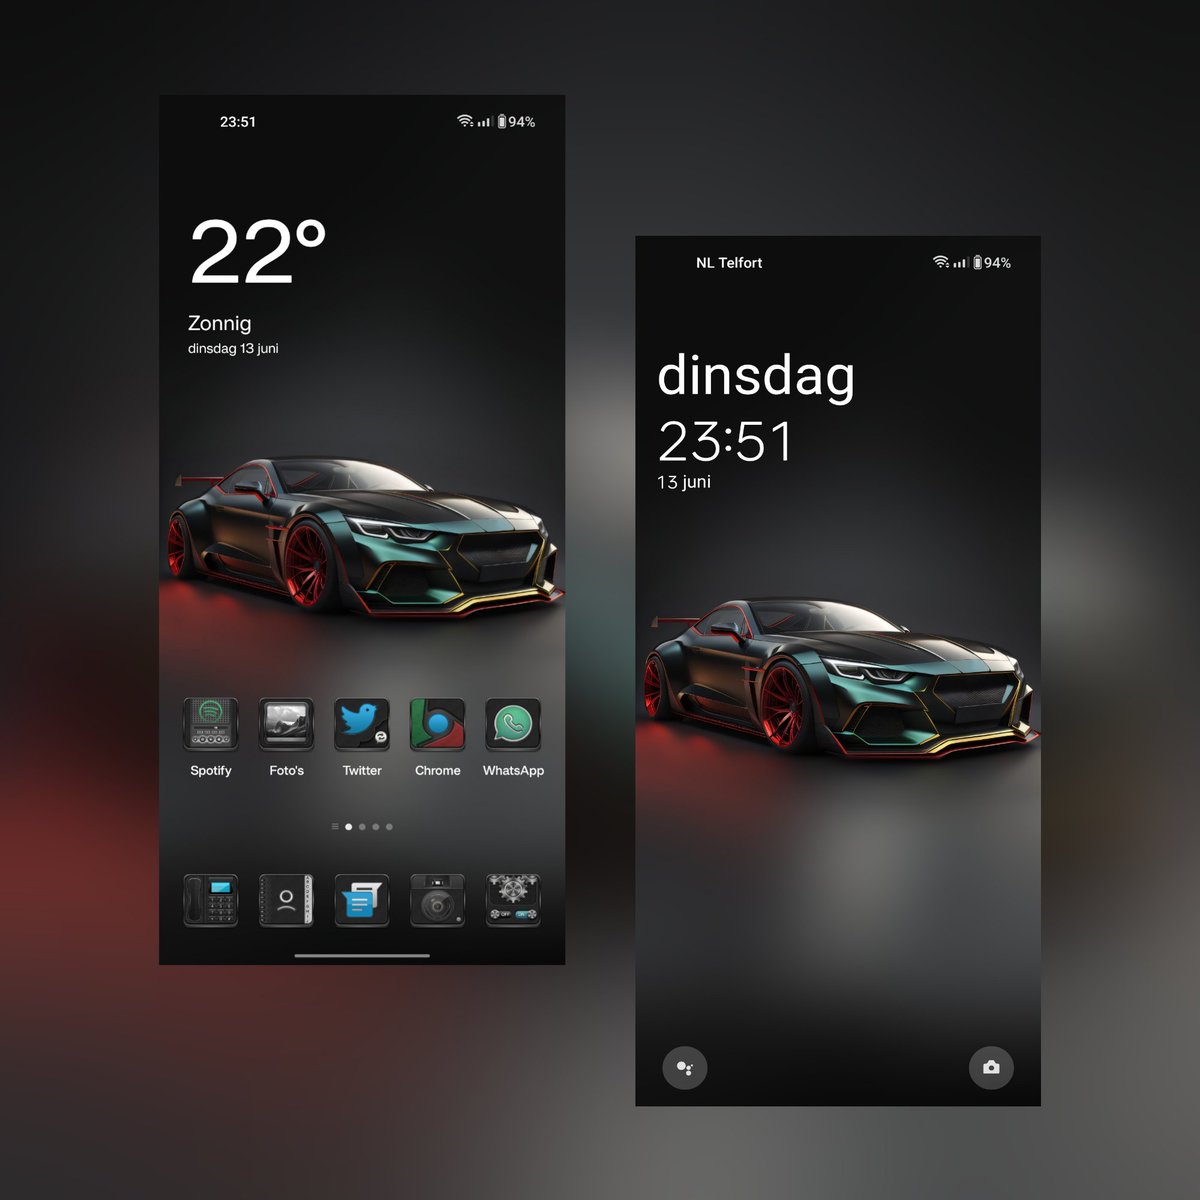 #artwork 
#Android 
#wallpaper 
#homescreen 
#OnePlus
#art
#cars
#Supercars                     
#sportcar
#exoticcar

my setup to stay this week on 
you can download it for free 
look in my profile 

Wallpapers : made by me 😎

3leven icons : @Coccco28 😎